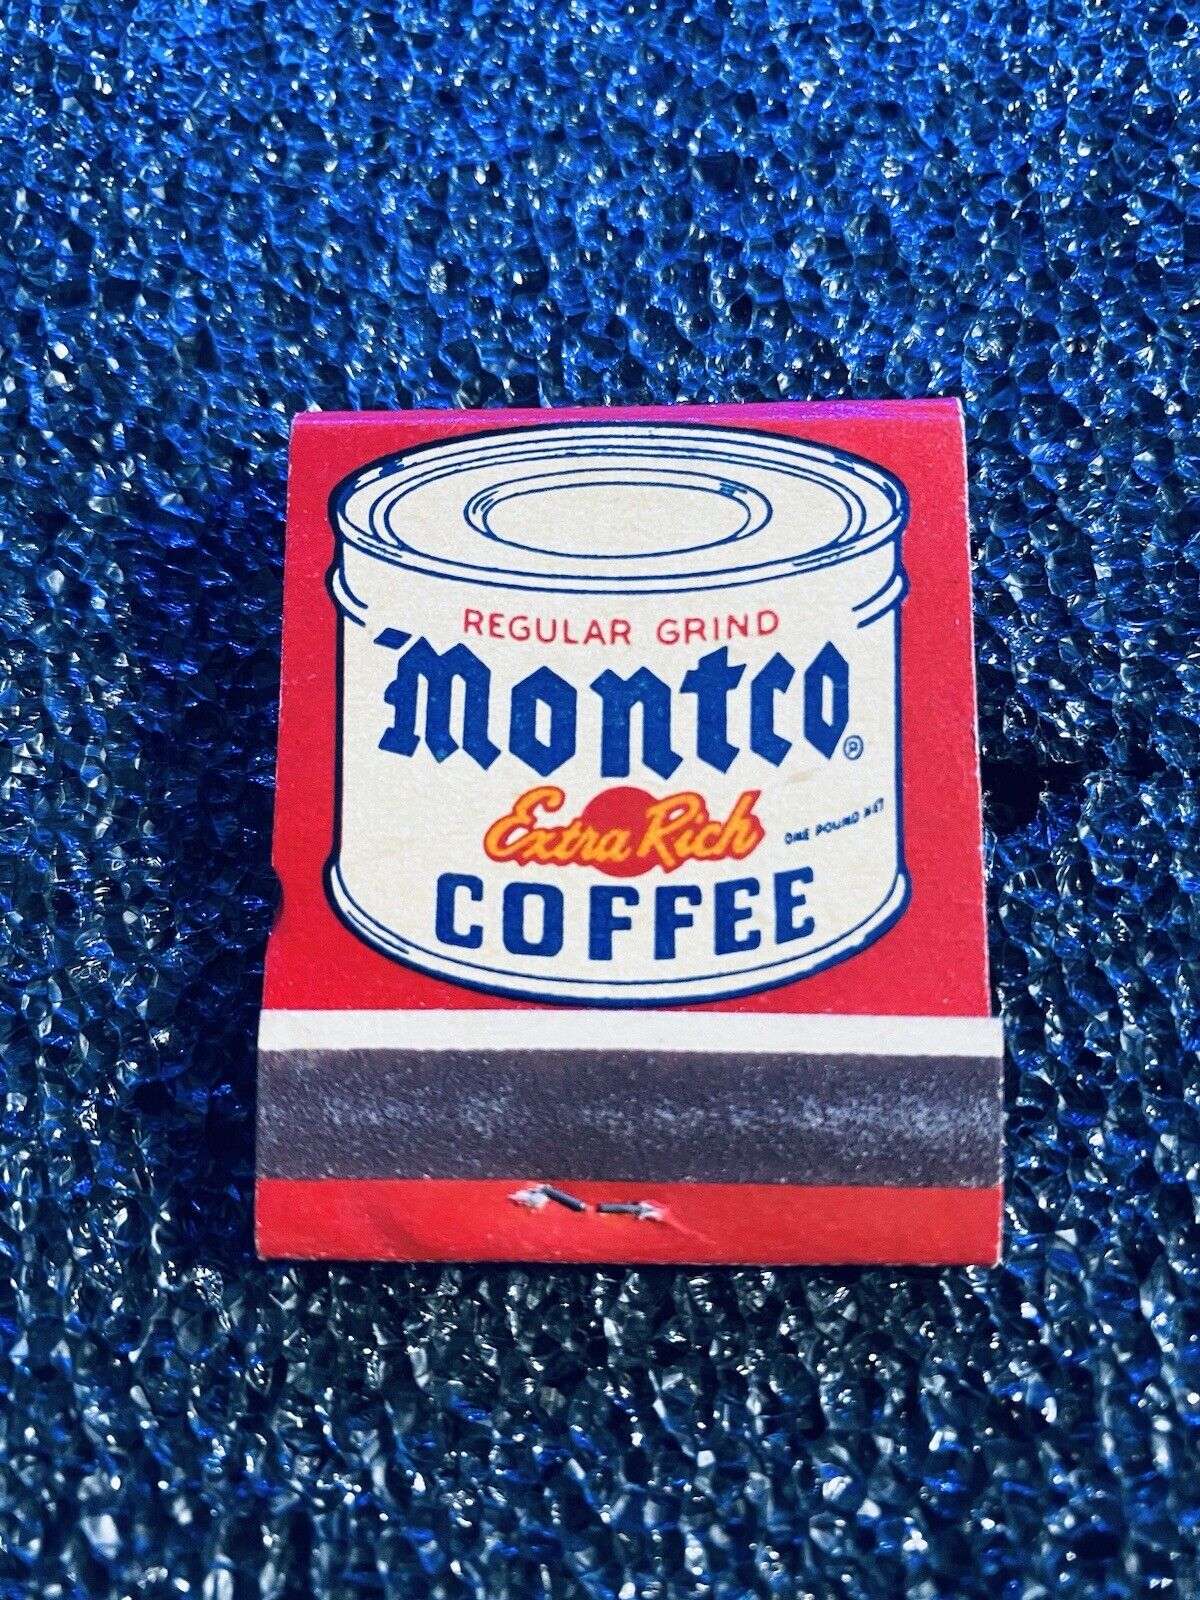 Vintage Matchbook MONTCO EXTRA RICH COFFEE Full Matchbook